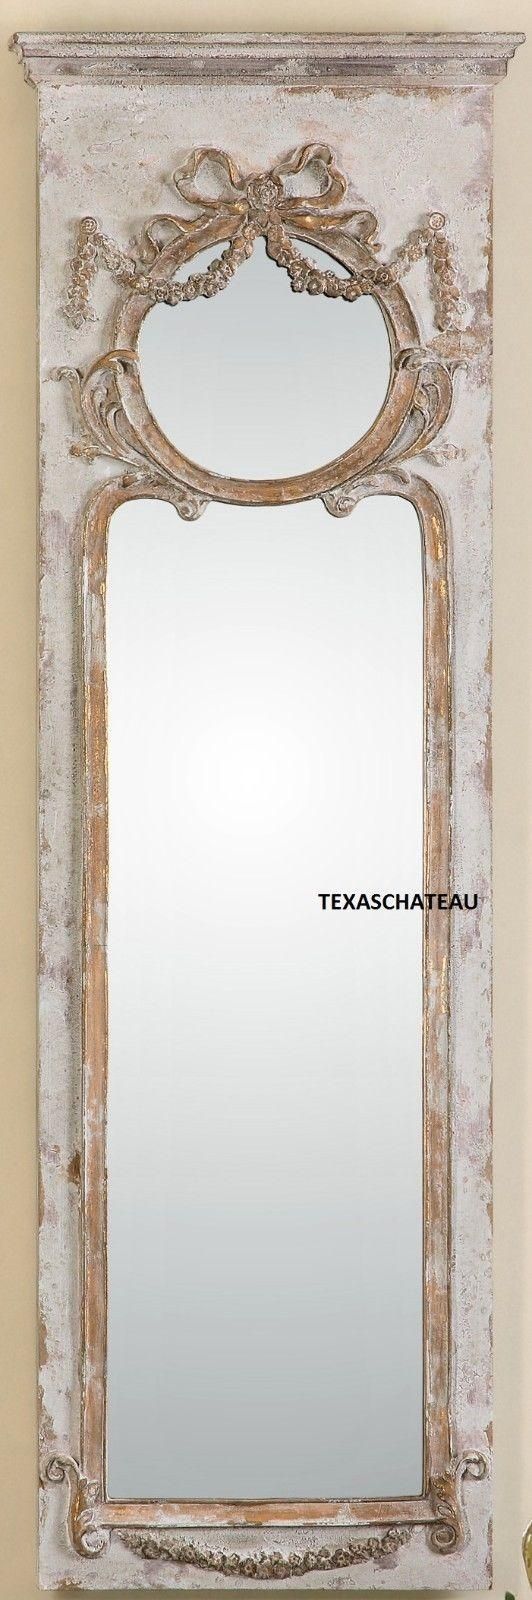 Large Ornate French Antique Cream Gold Trumeau Mirror Dressing Inside Cream Ornate Mirror (View 6 of 20)